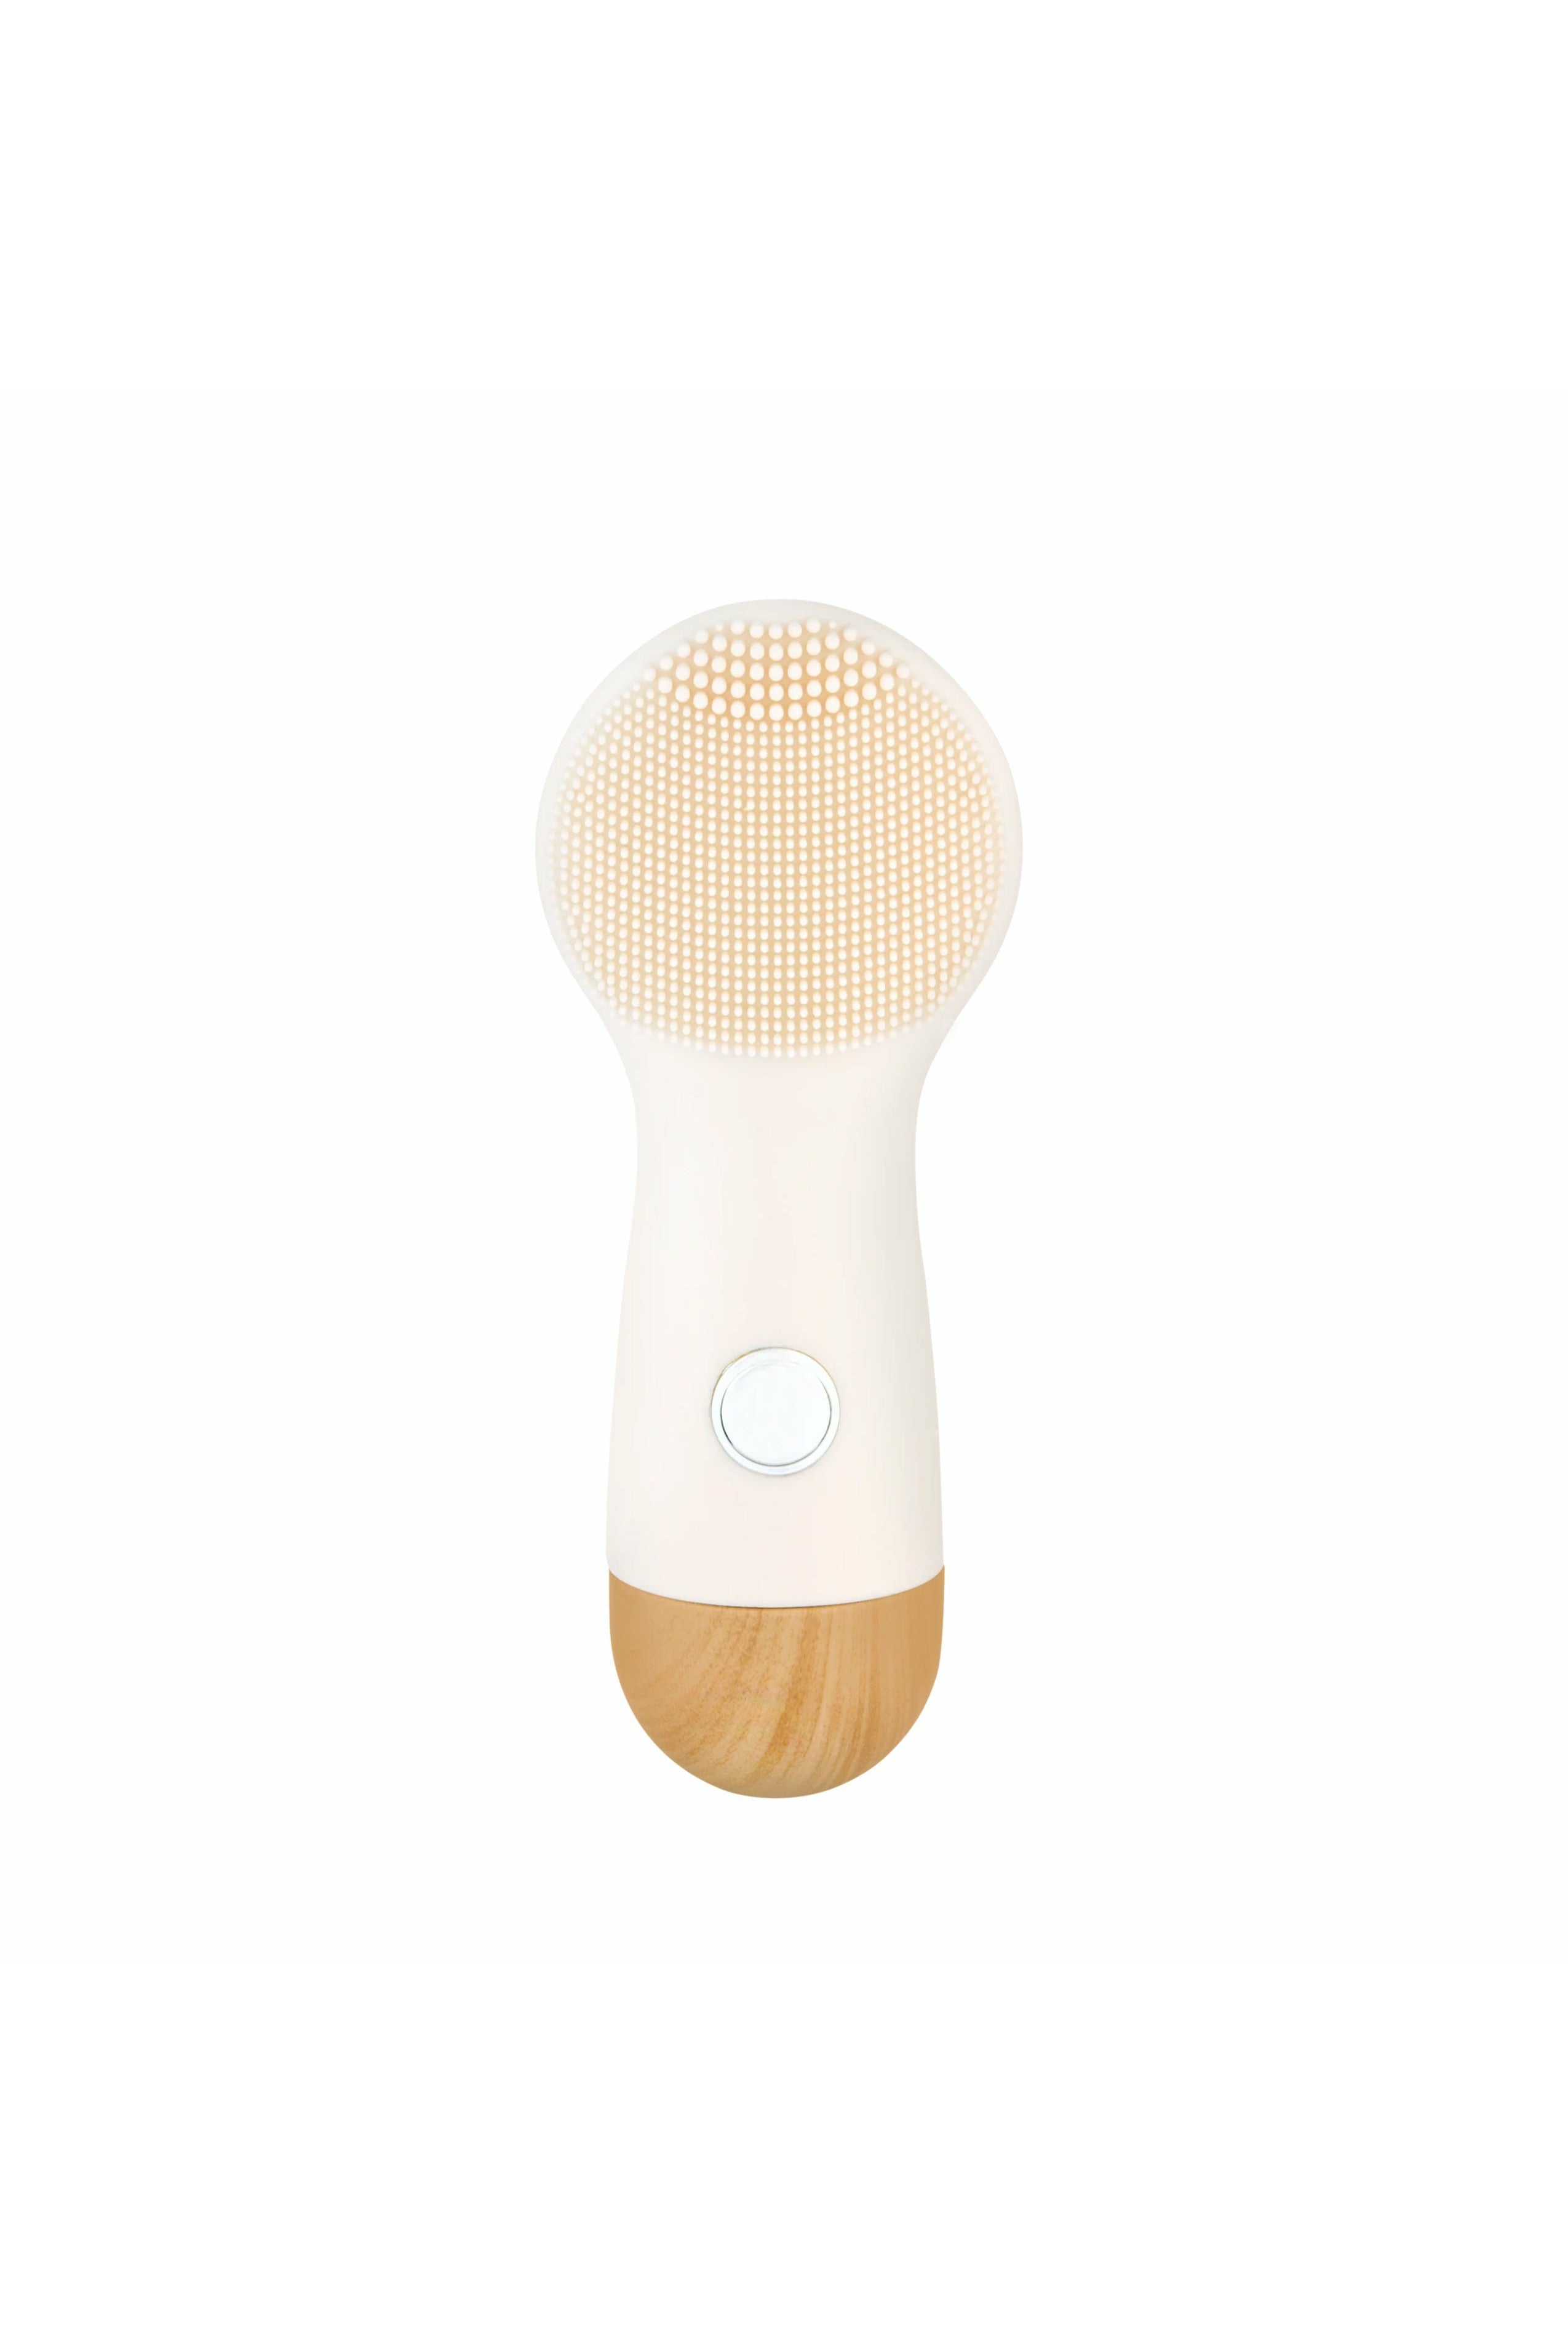 Nion Beauty Opus Negative Ion Face Cleansing Device -Luxe